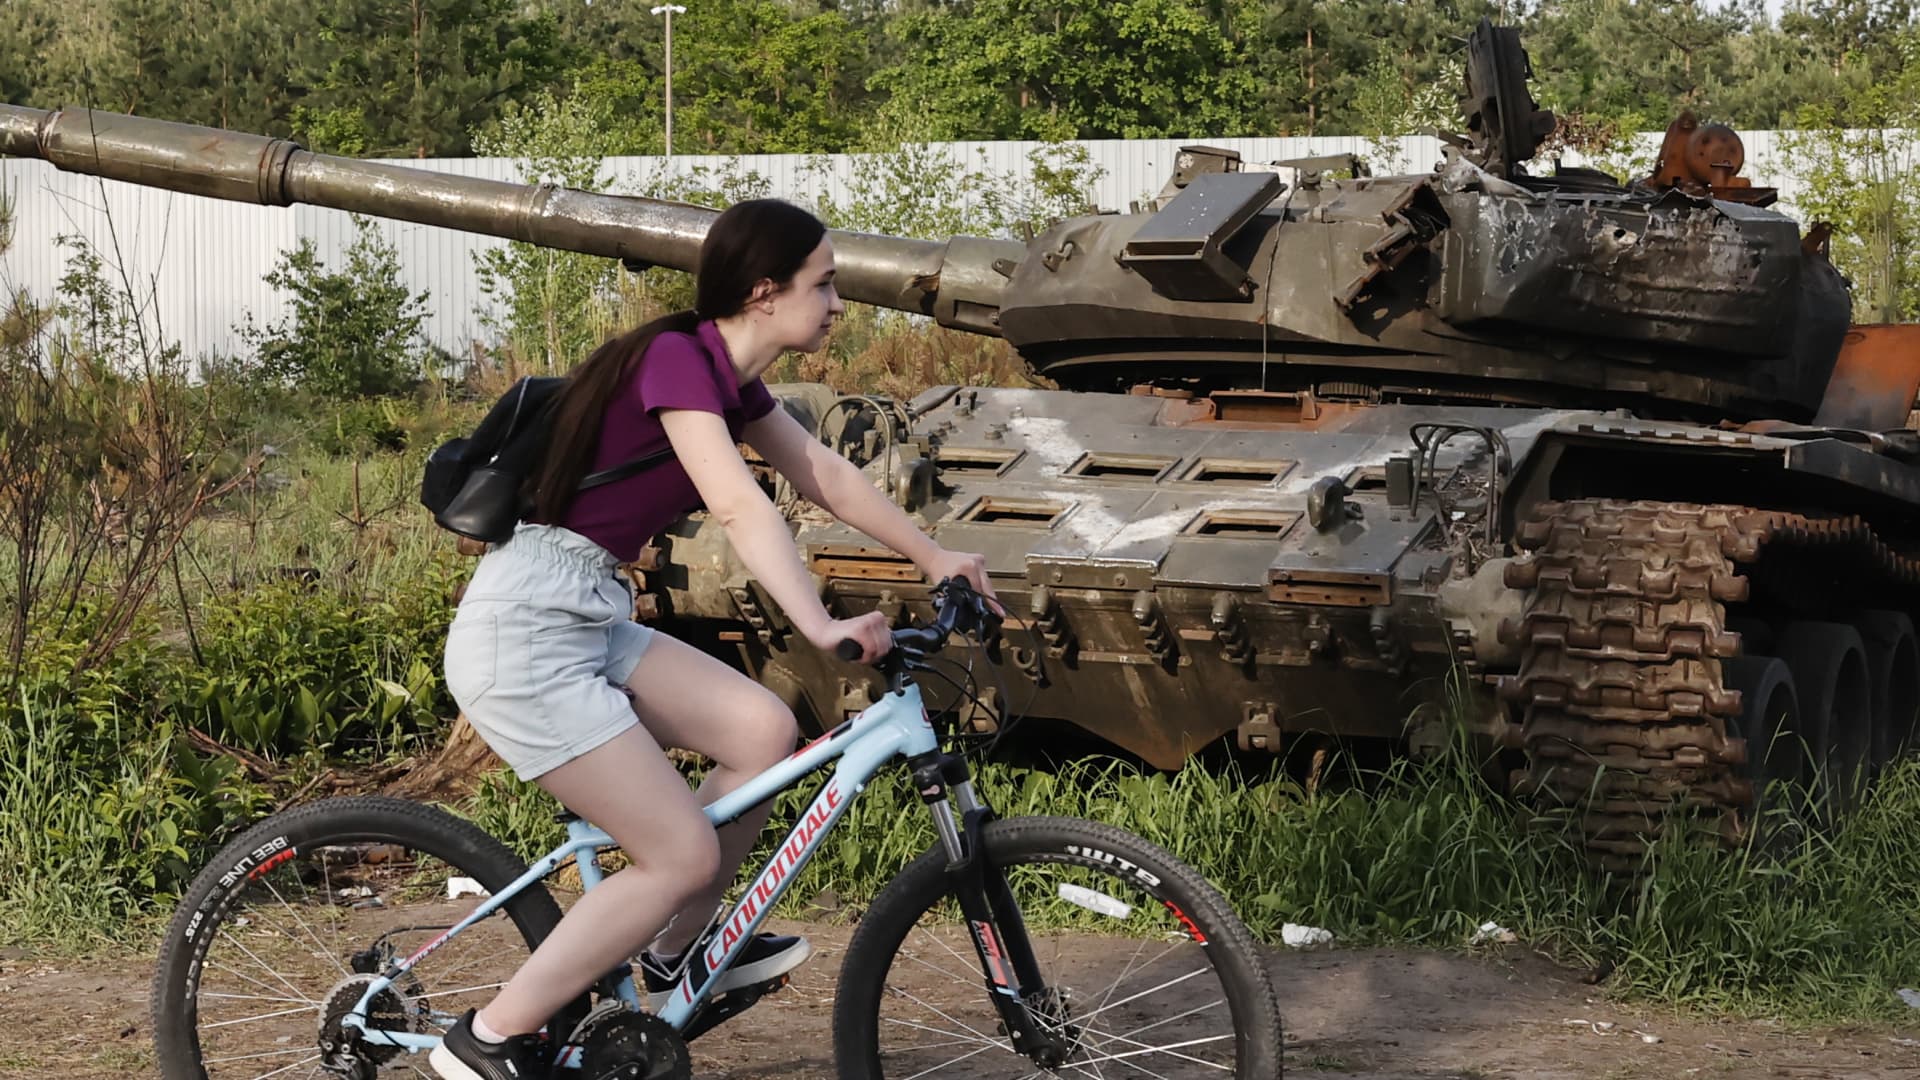 A cyclist rides in front of a wrecked tank ahead of the World Bicycle Day in village of Dmitrivka in Ukraine's Kyiv Oblast on June 01, 2022 as the Russia-Ukraine war continues. 